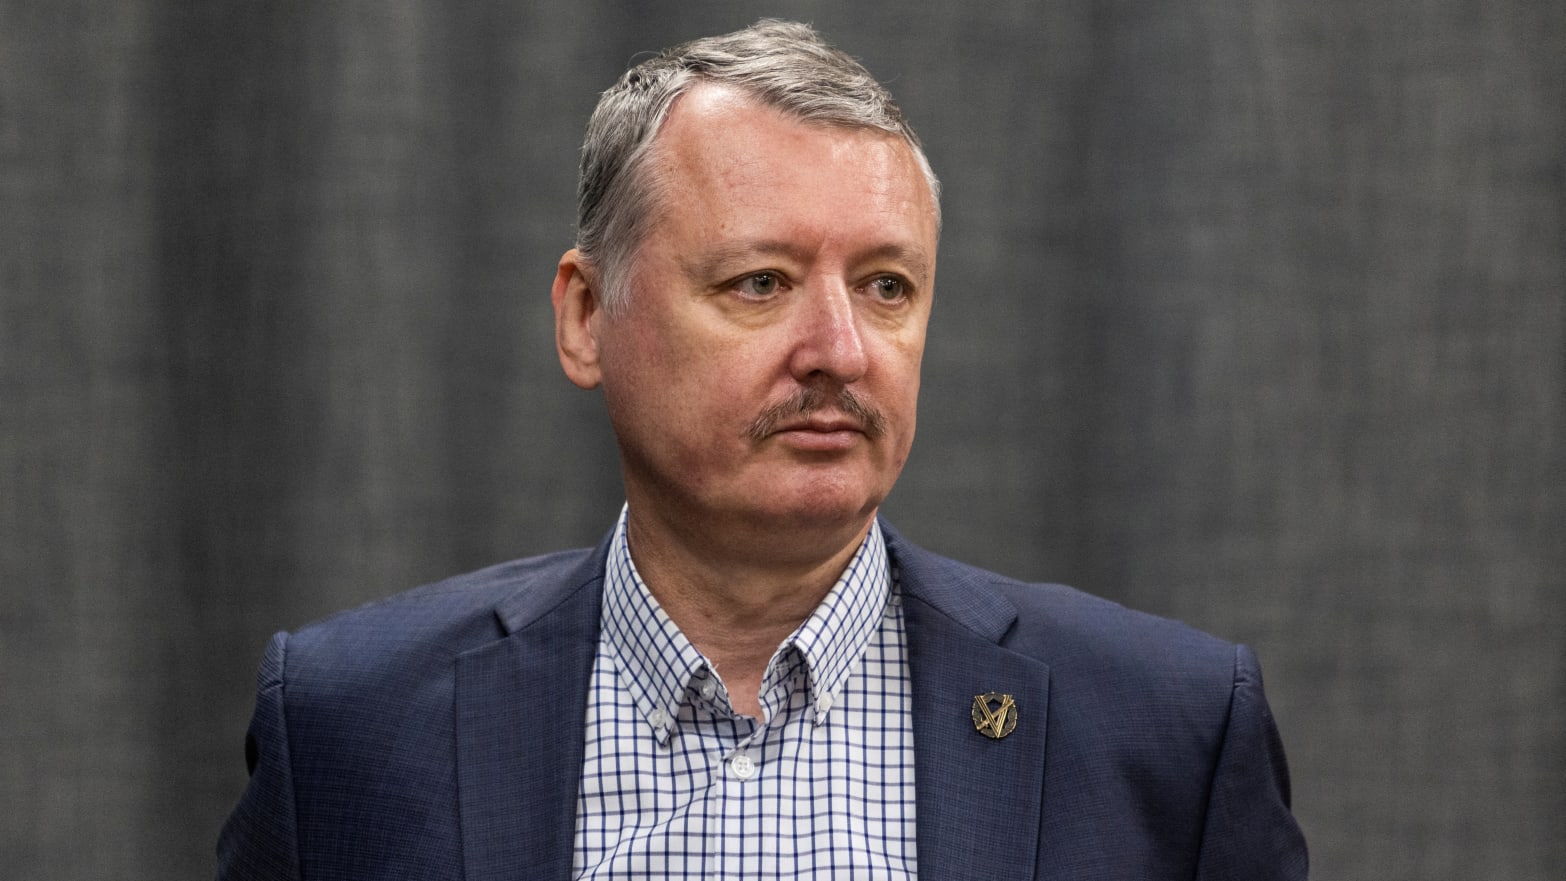 Igor Girkin, who is also known as Igor Strelkov, attends a press conference of Russian nationalist group, known as the “Club of Angry Patriots” in Moscow, Russia May 12, 2023.  